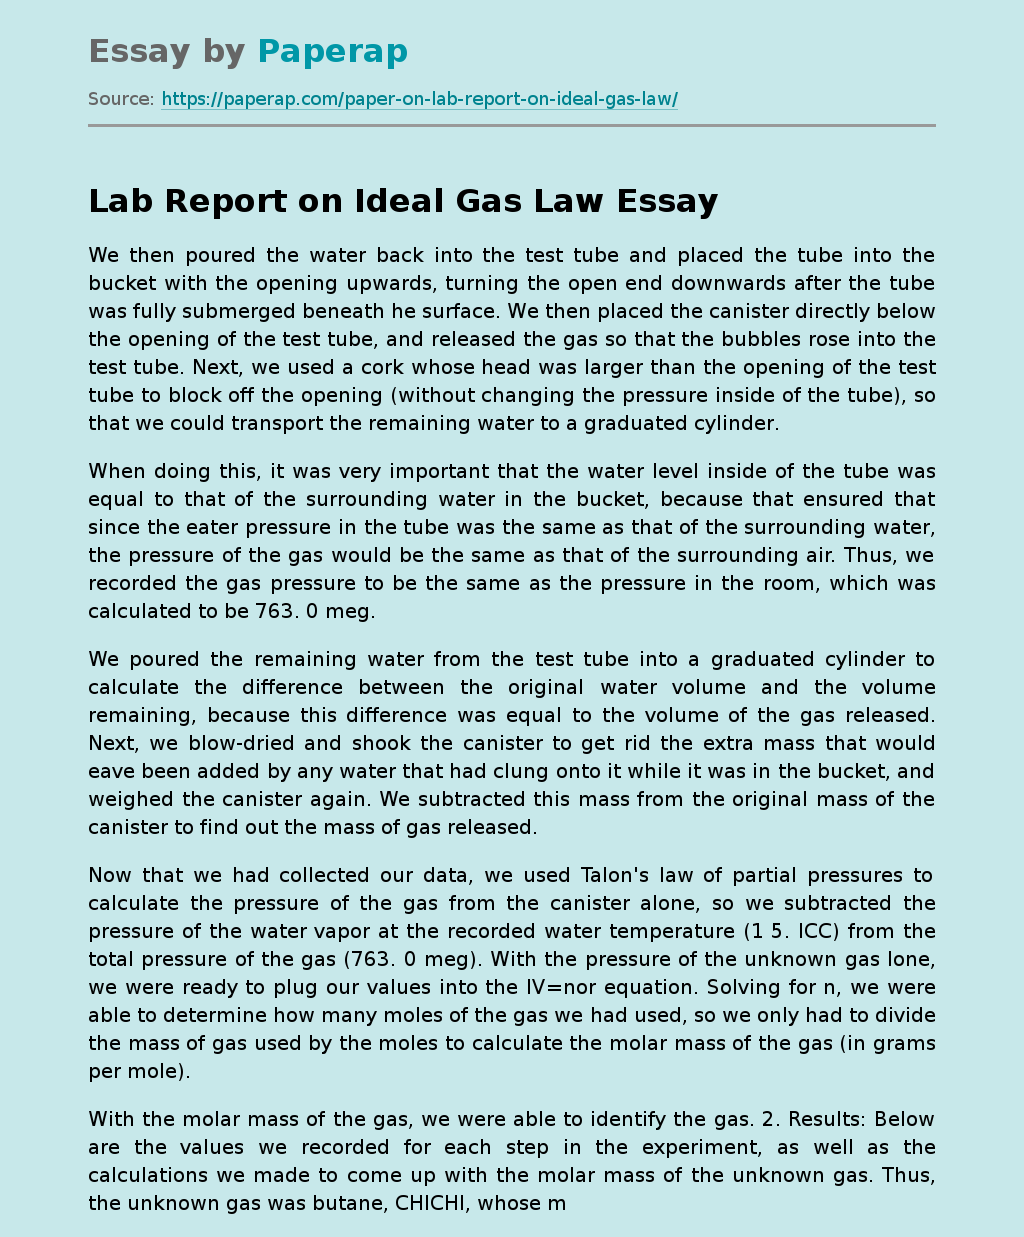 Lab Report on Ideal Gas Law